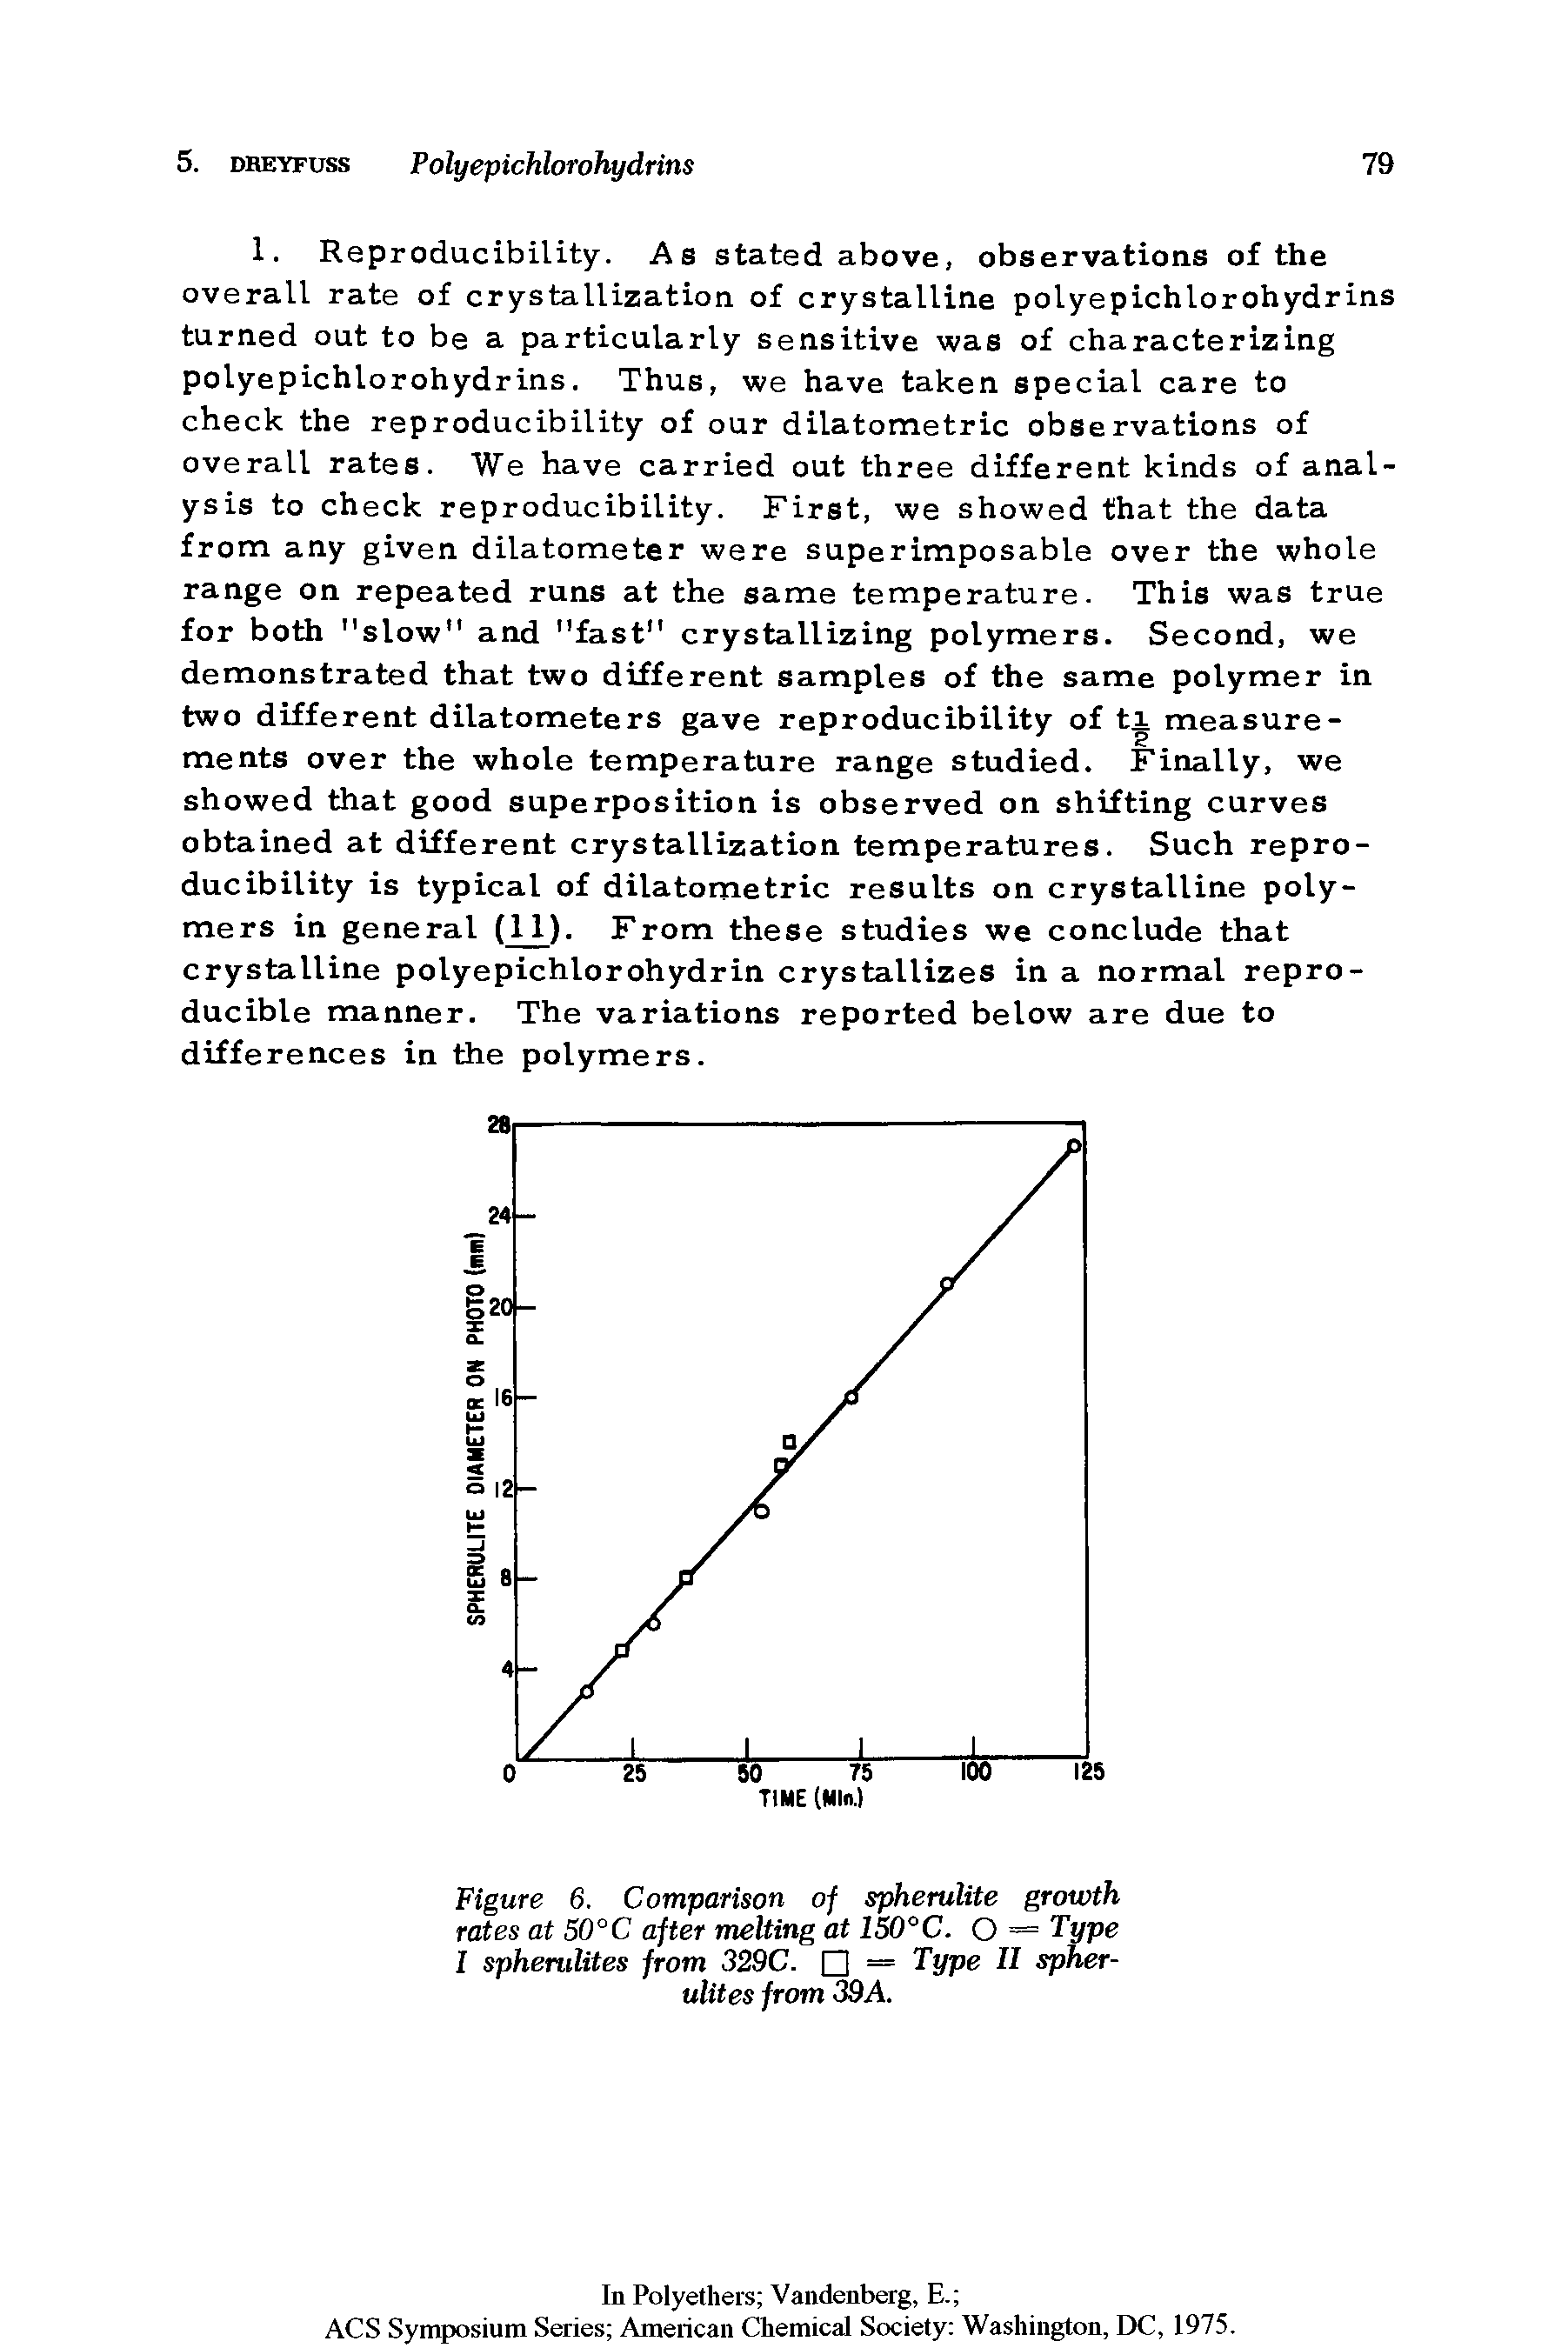 Figure 6. Comparison of spherulite growth rates at 50°C after melting at 150°C. O = Type I spherulites from 329C. = Type II spher-ulites from 39A.